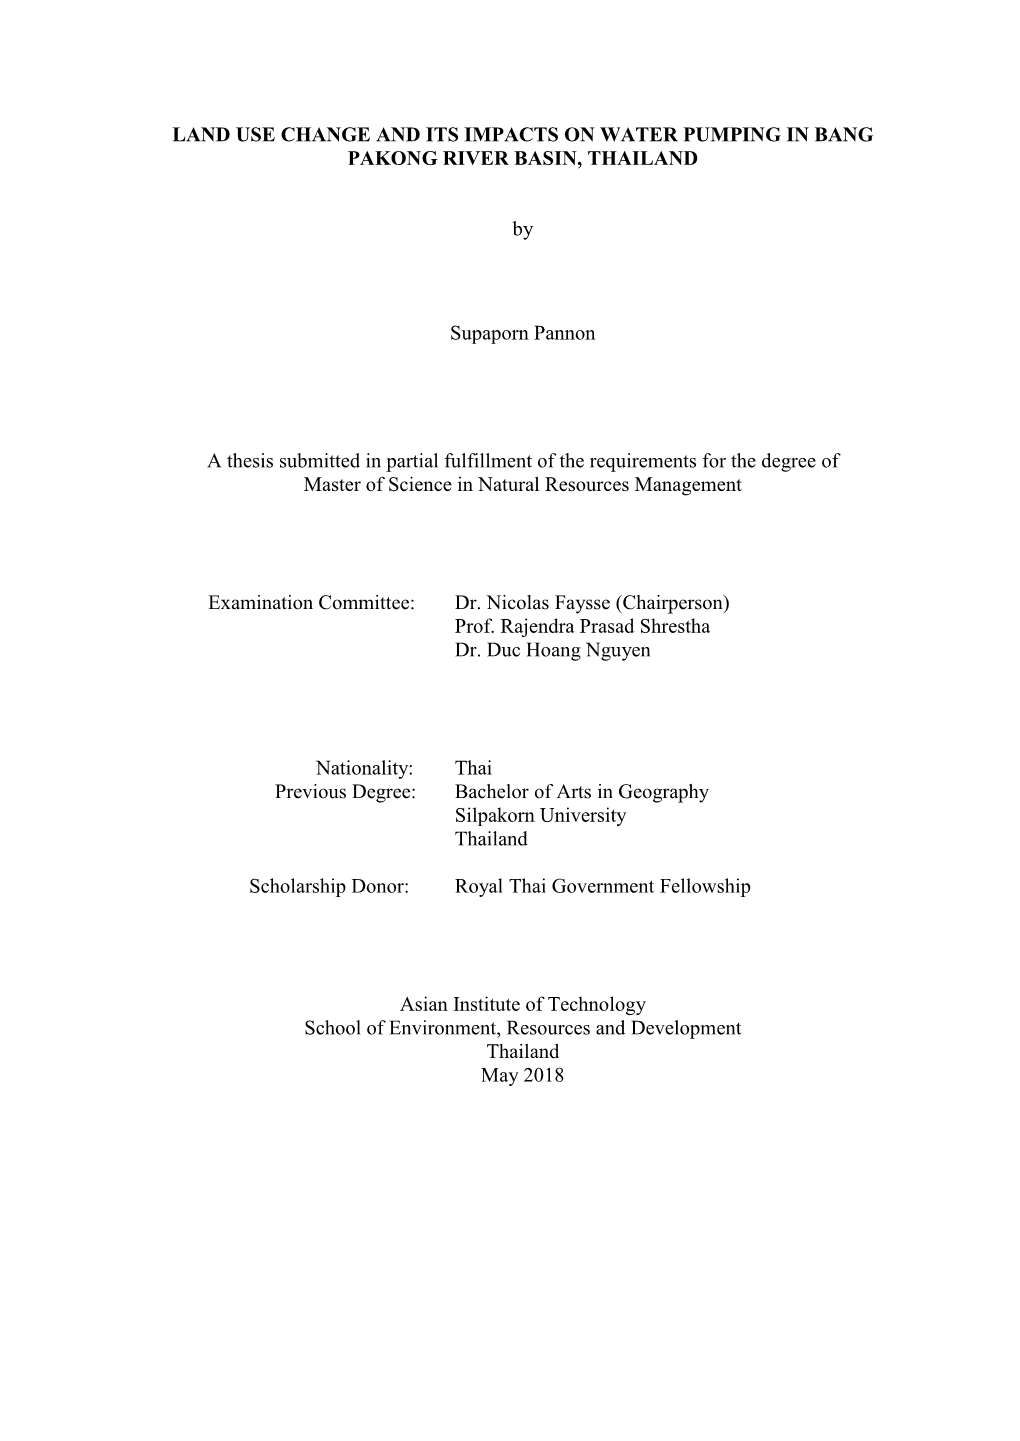 LAND USE CHANGE and ITS IMPACTS on WATER PUMPING in BANG PAKONG RIVER BASIN, THAILAND by Supaporn Pannon a Thesis Submitted in P